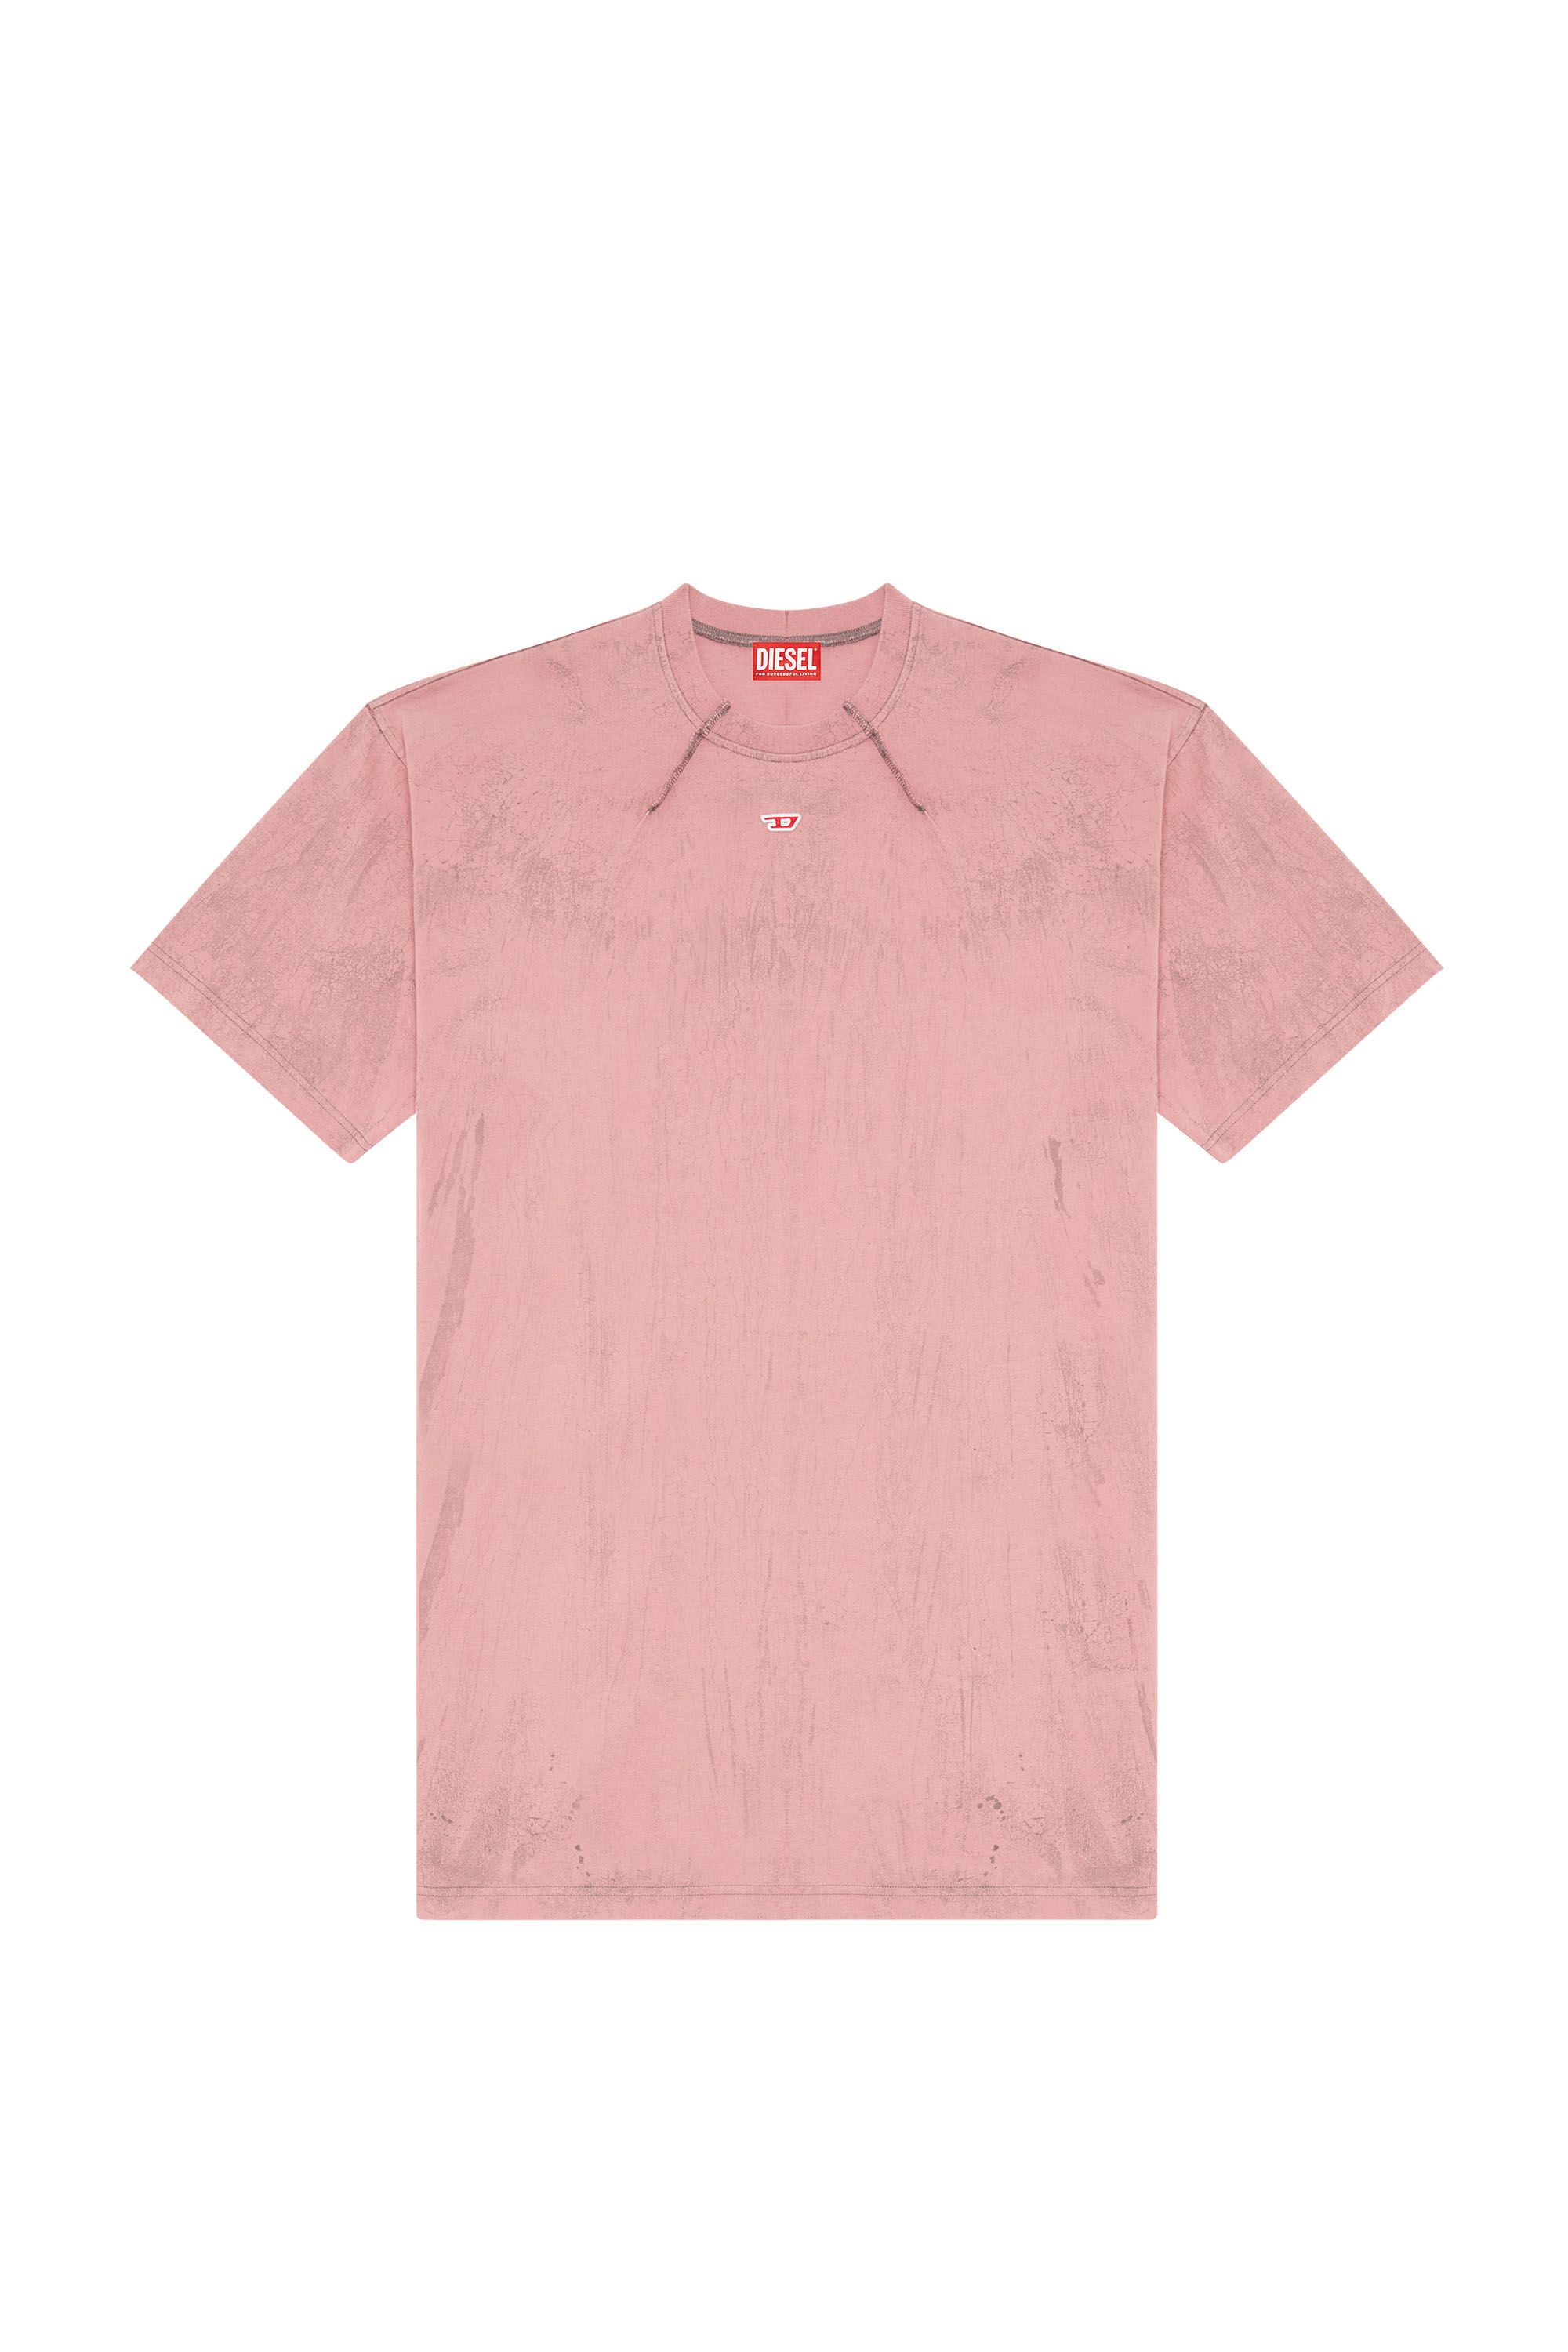 Diesel - T-COS, Man T-shirt in plaster effect jersey in Pink - Image 2